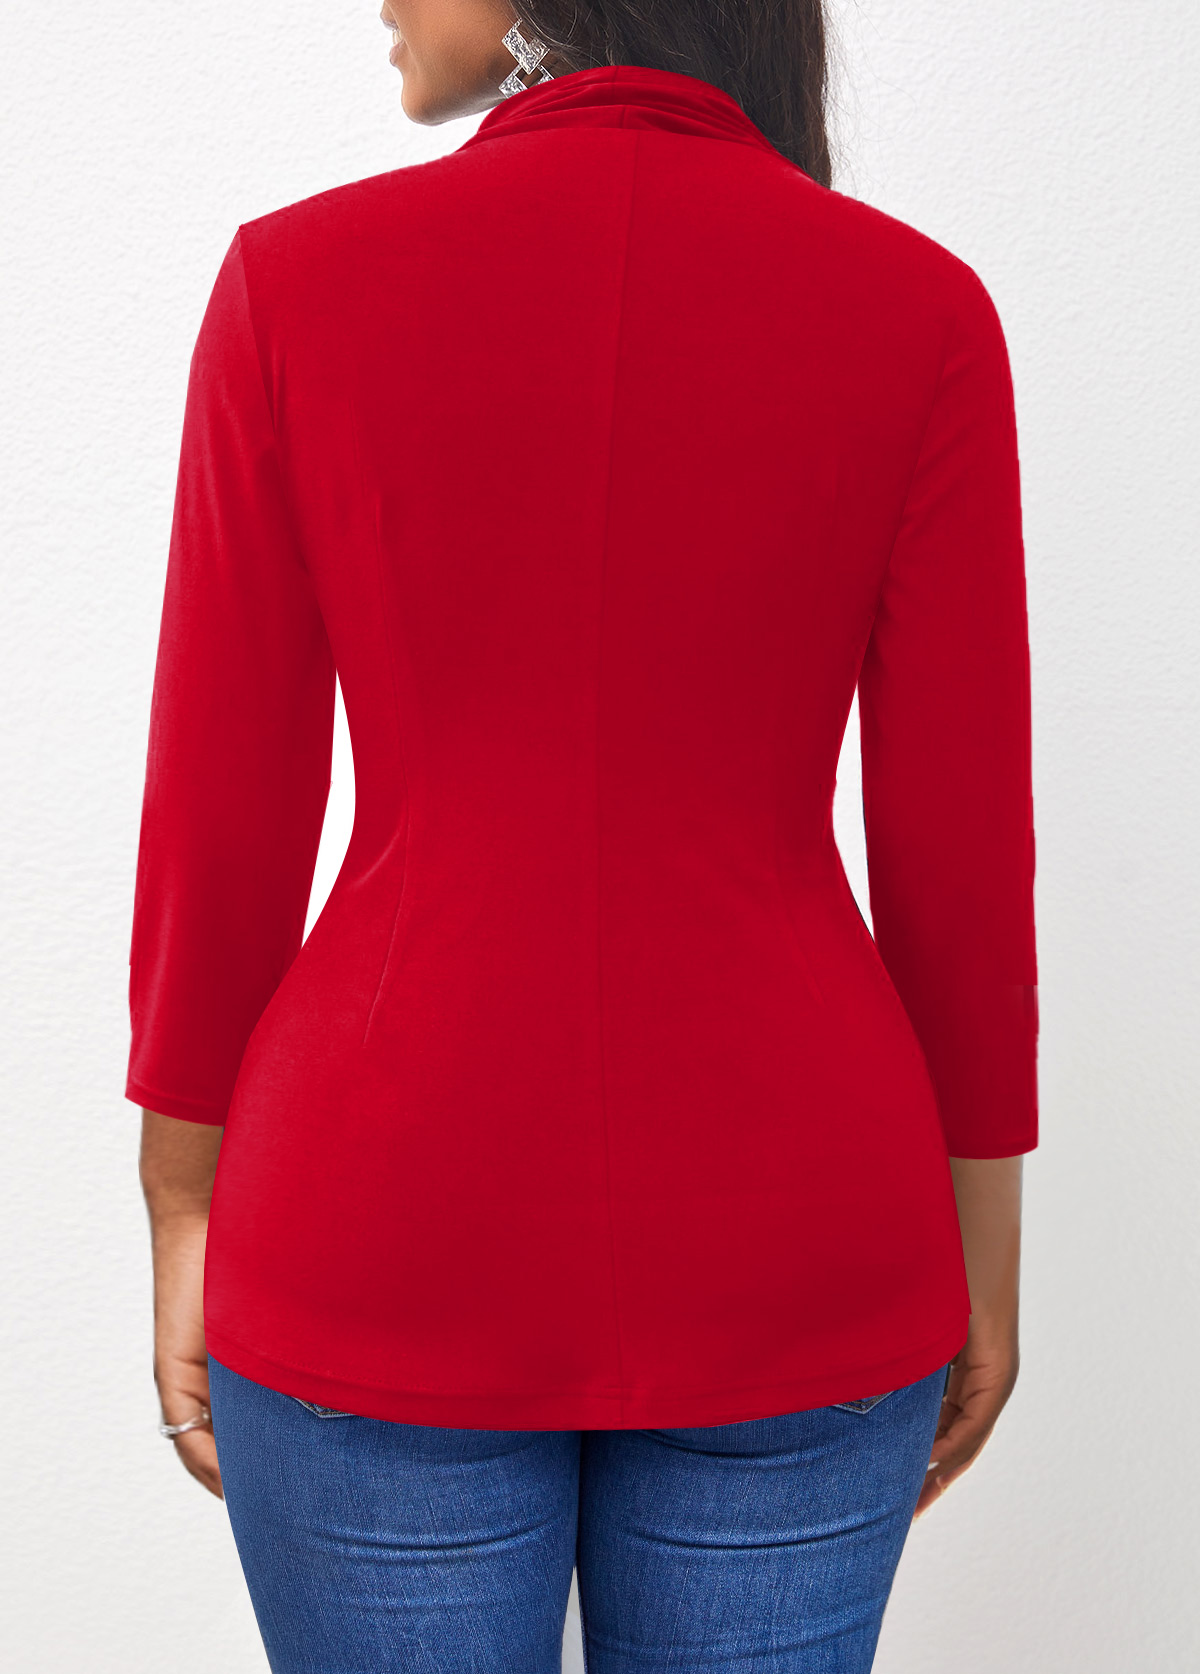 Twist Front 3/4 Sleeve Red T Shirt